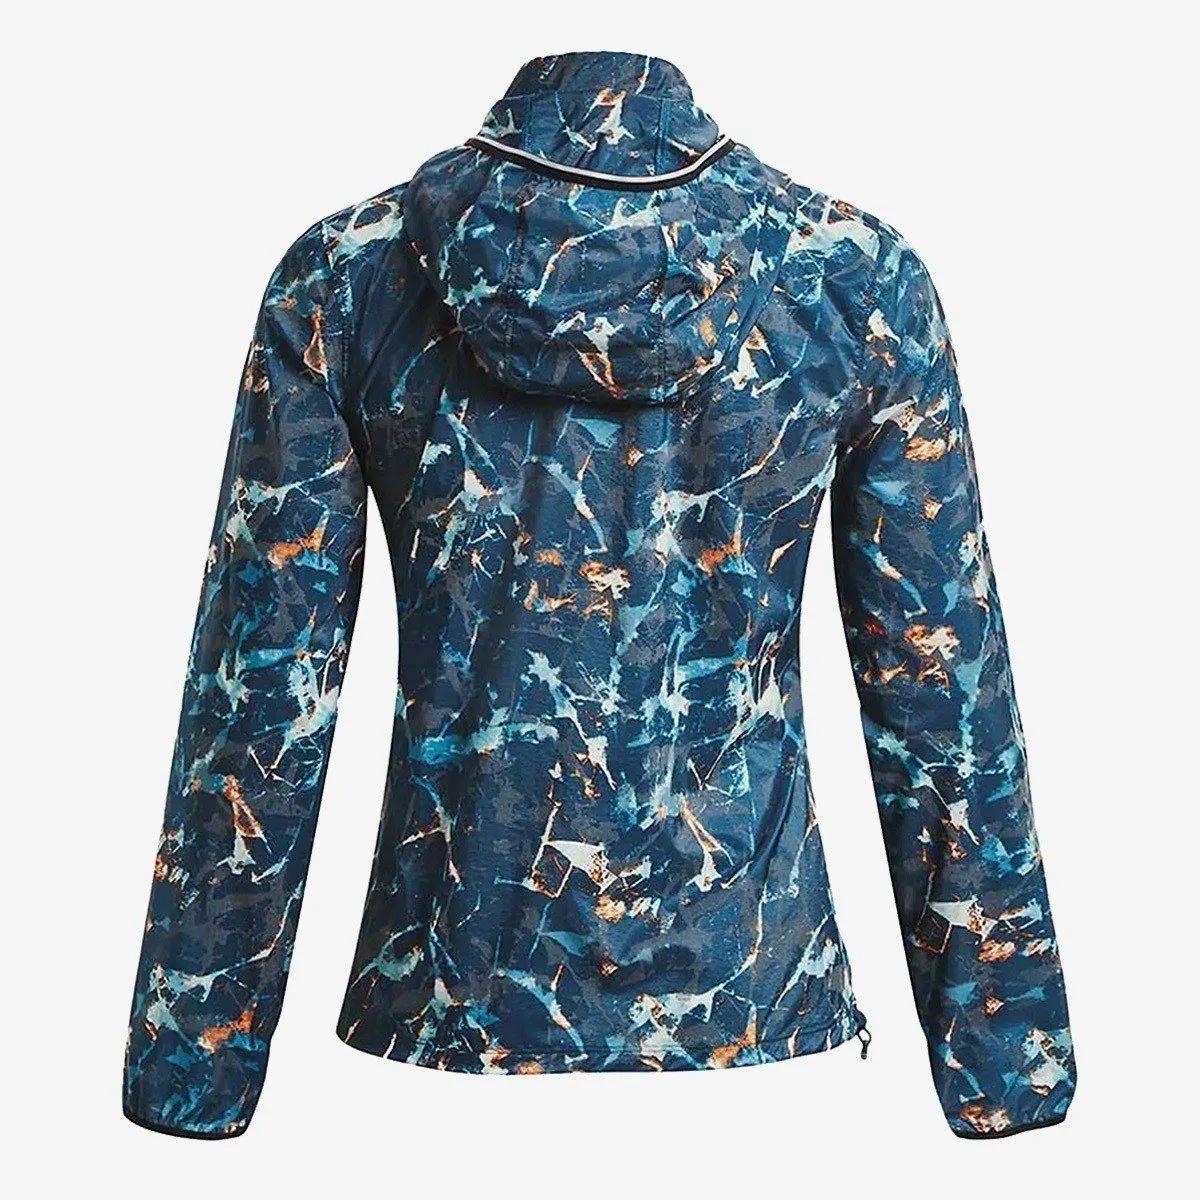 UNDER ARMOUR UA STORM OUTRUN COLD JACKET 